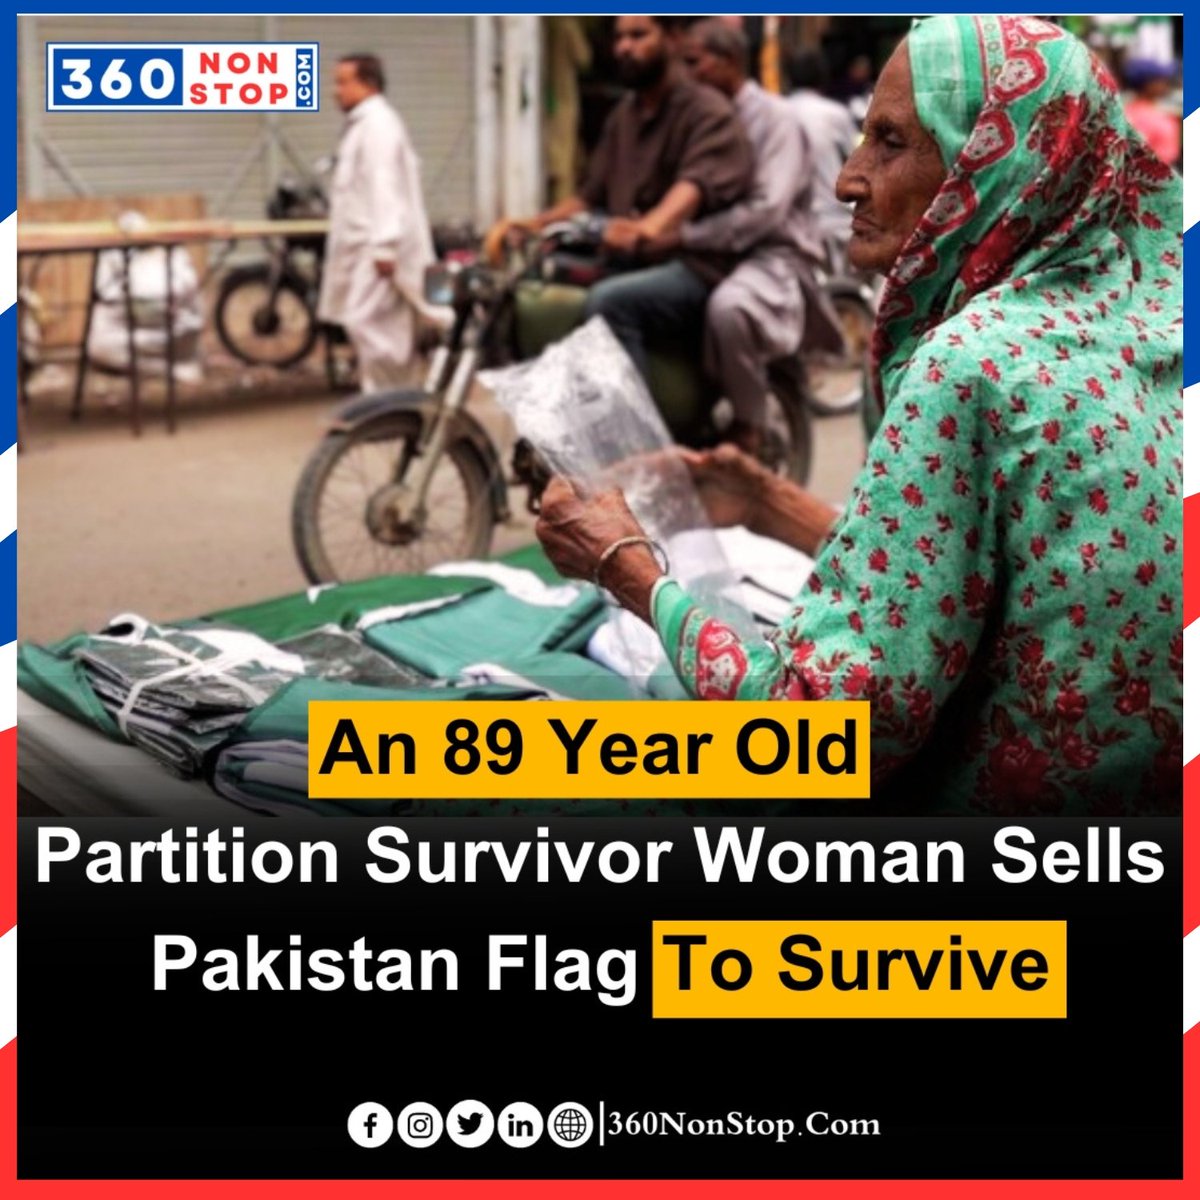 An 89 Year Old Partition Survivor Woman Sells Pakistan Flag To Survive
#PartitionSurvivor #ElderlyWoman #PakistanFlag #Survival #Hardship #Resilience #History #Inspirational #SupportNeeded #StoriesOfStrength #360nonstop